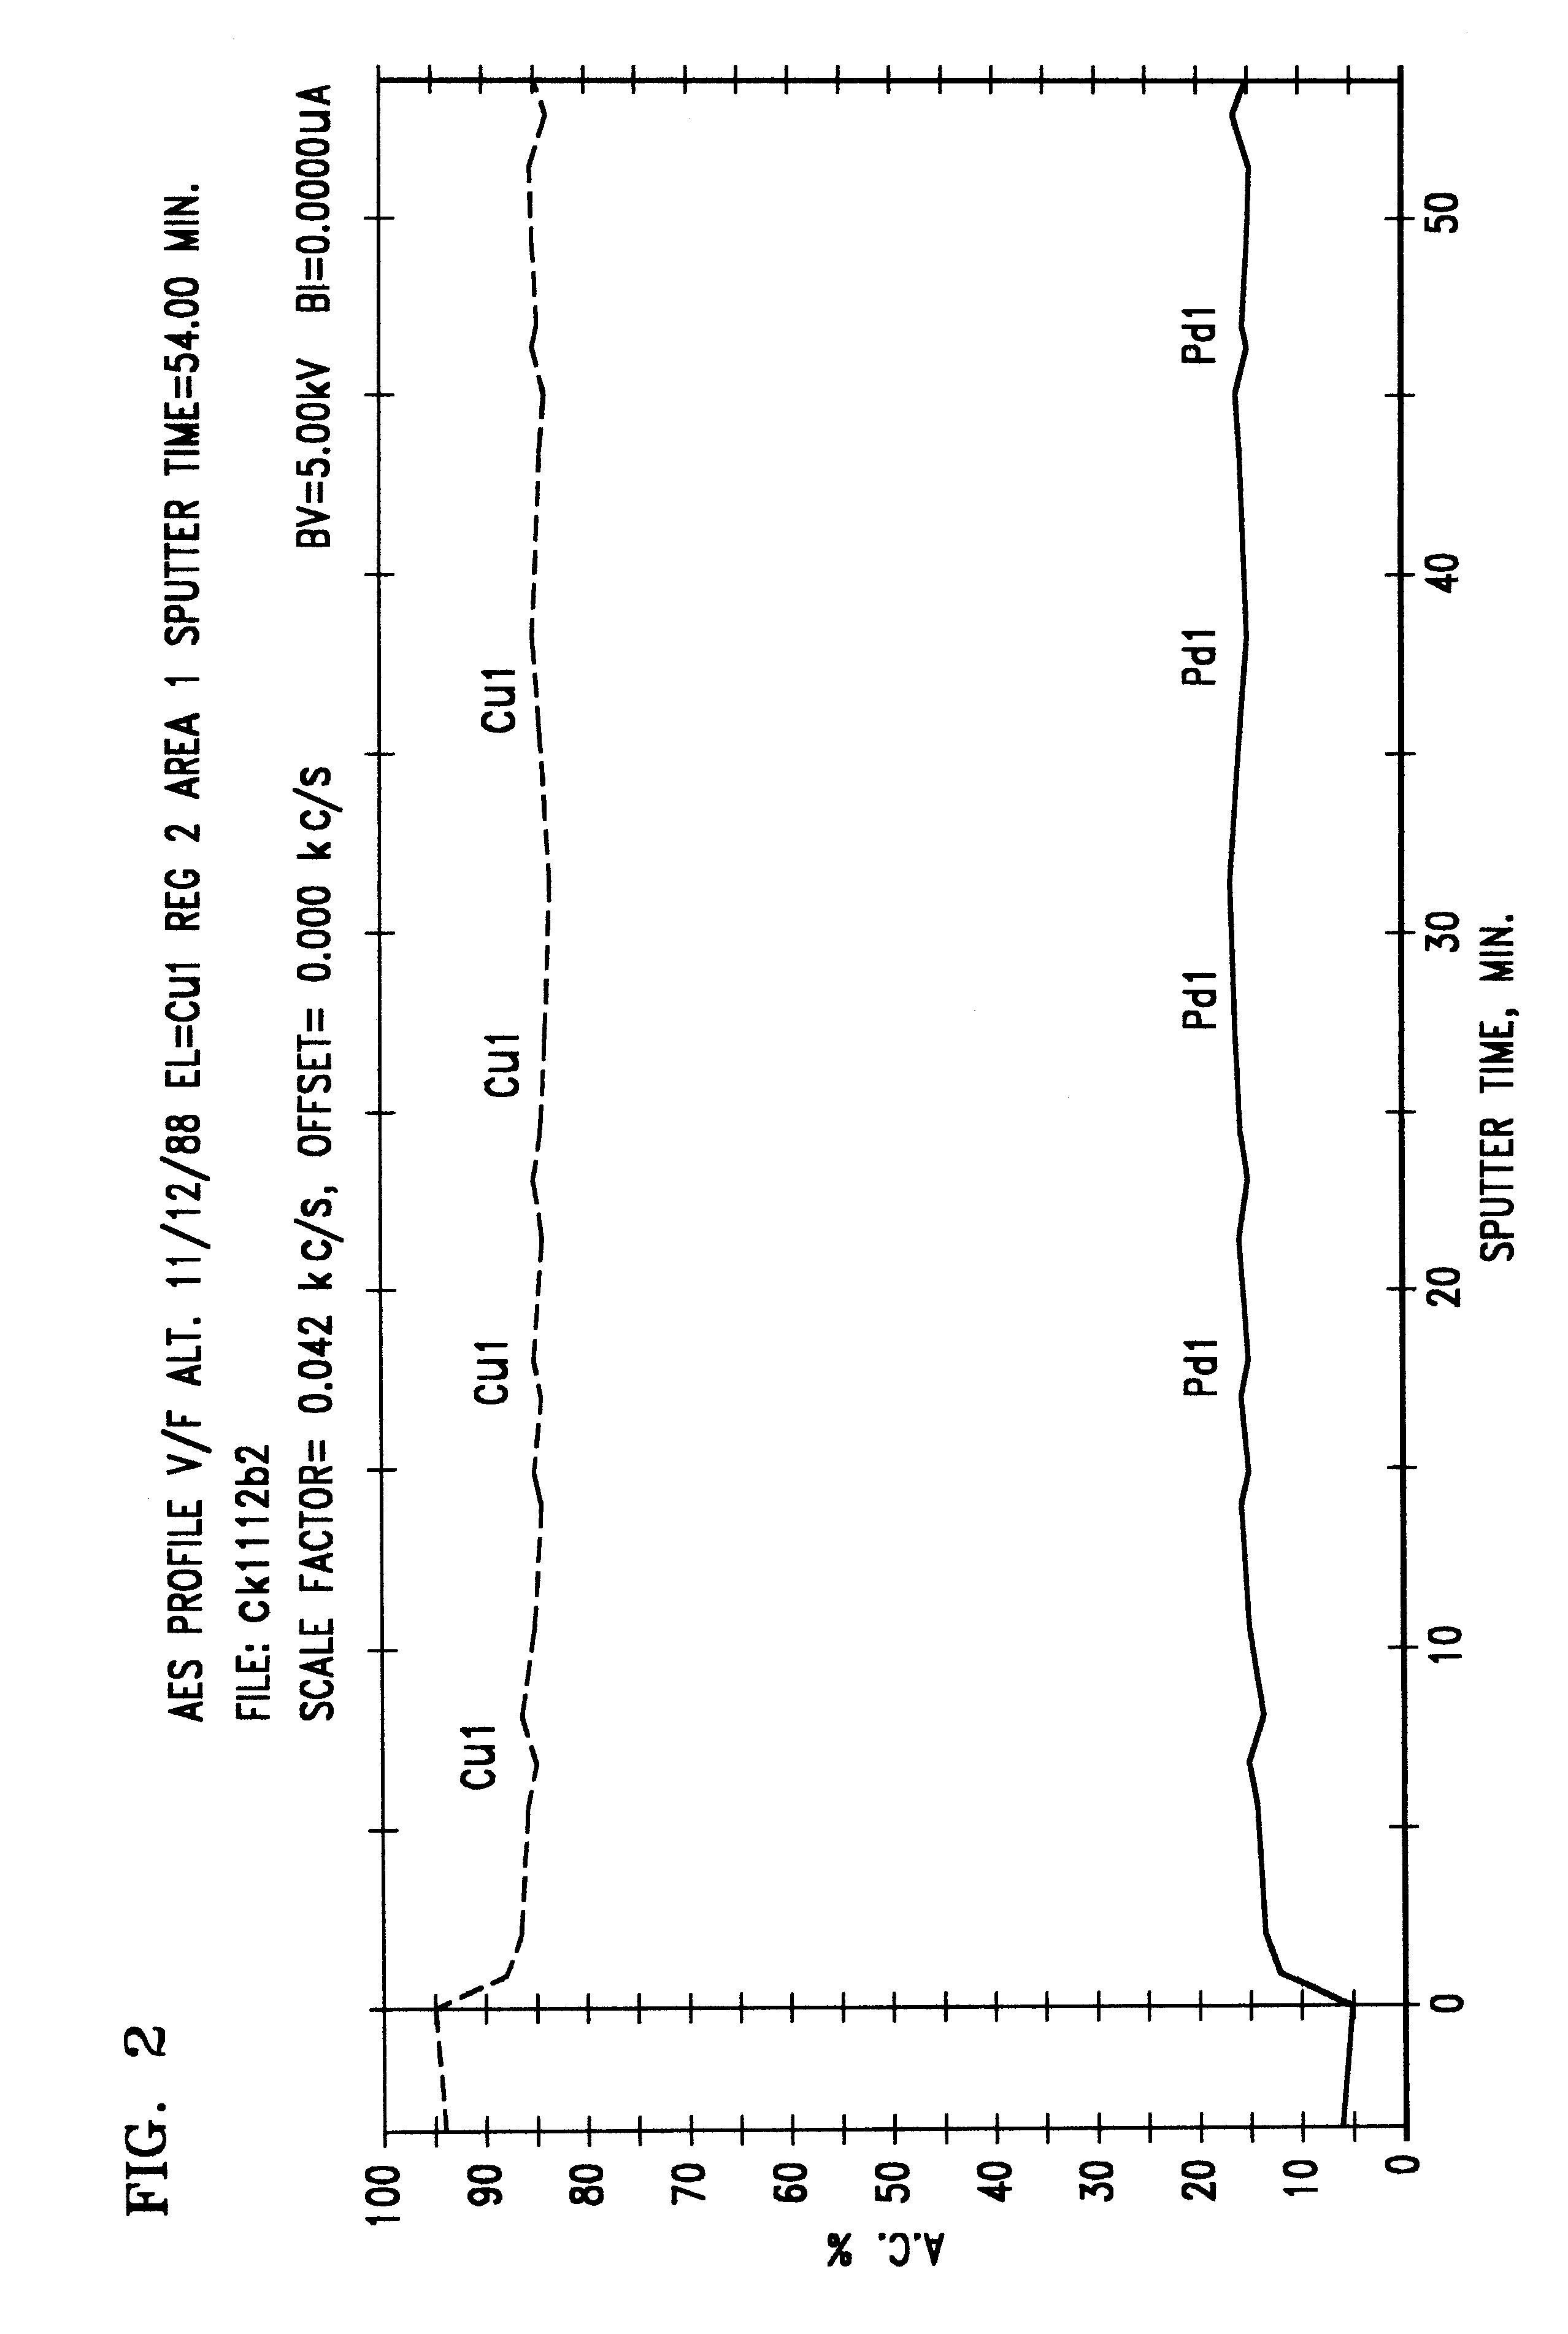 Method of producing thin palladium-copper and the like, palladium alloy membranes by solid-solid metallic interdiffusion, and improved membrane